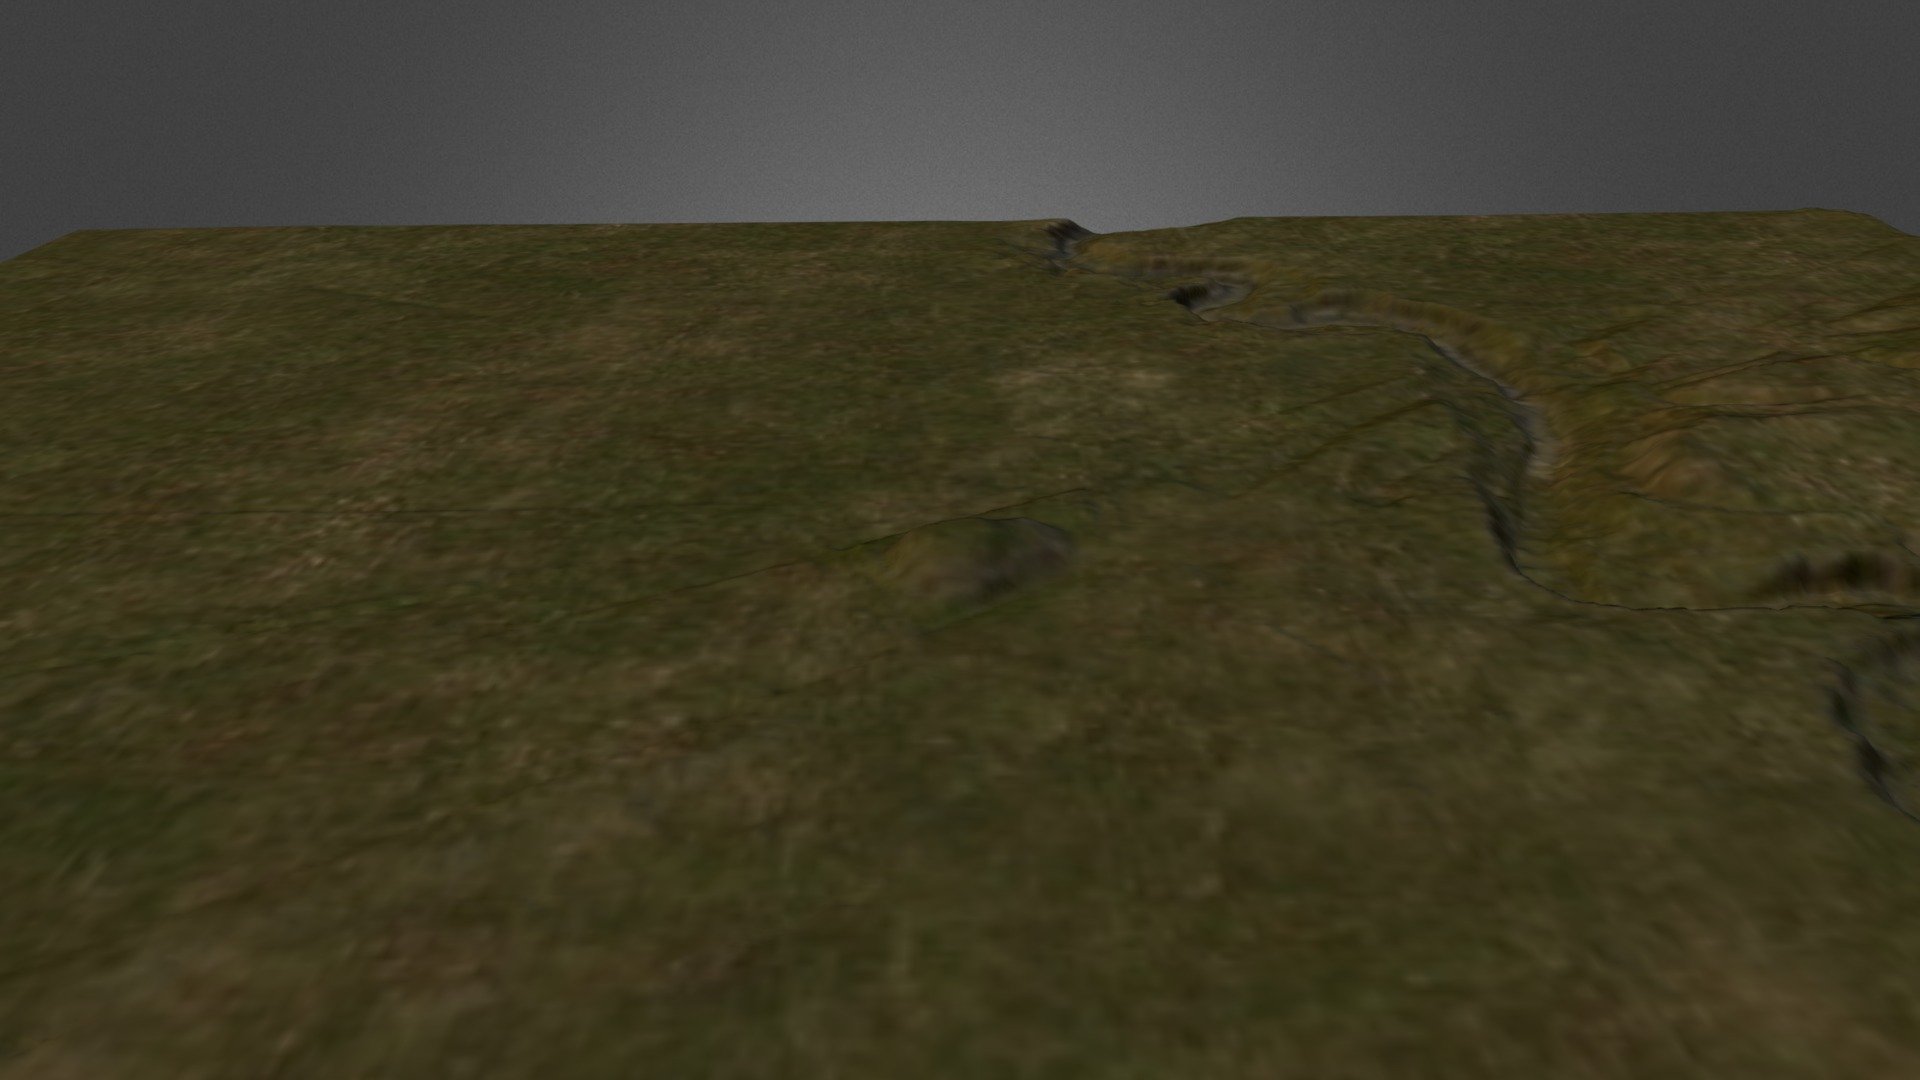 Simple terrain model of Dornbusch Mound site in Mississippi. Created in L3DT from DEM data exported from ArcMap 3d model